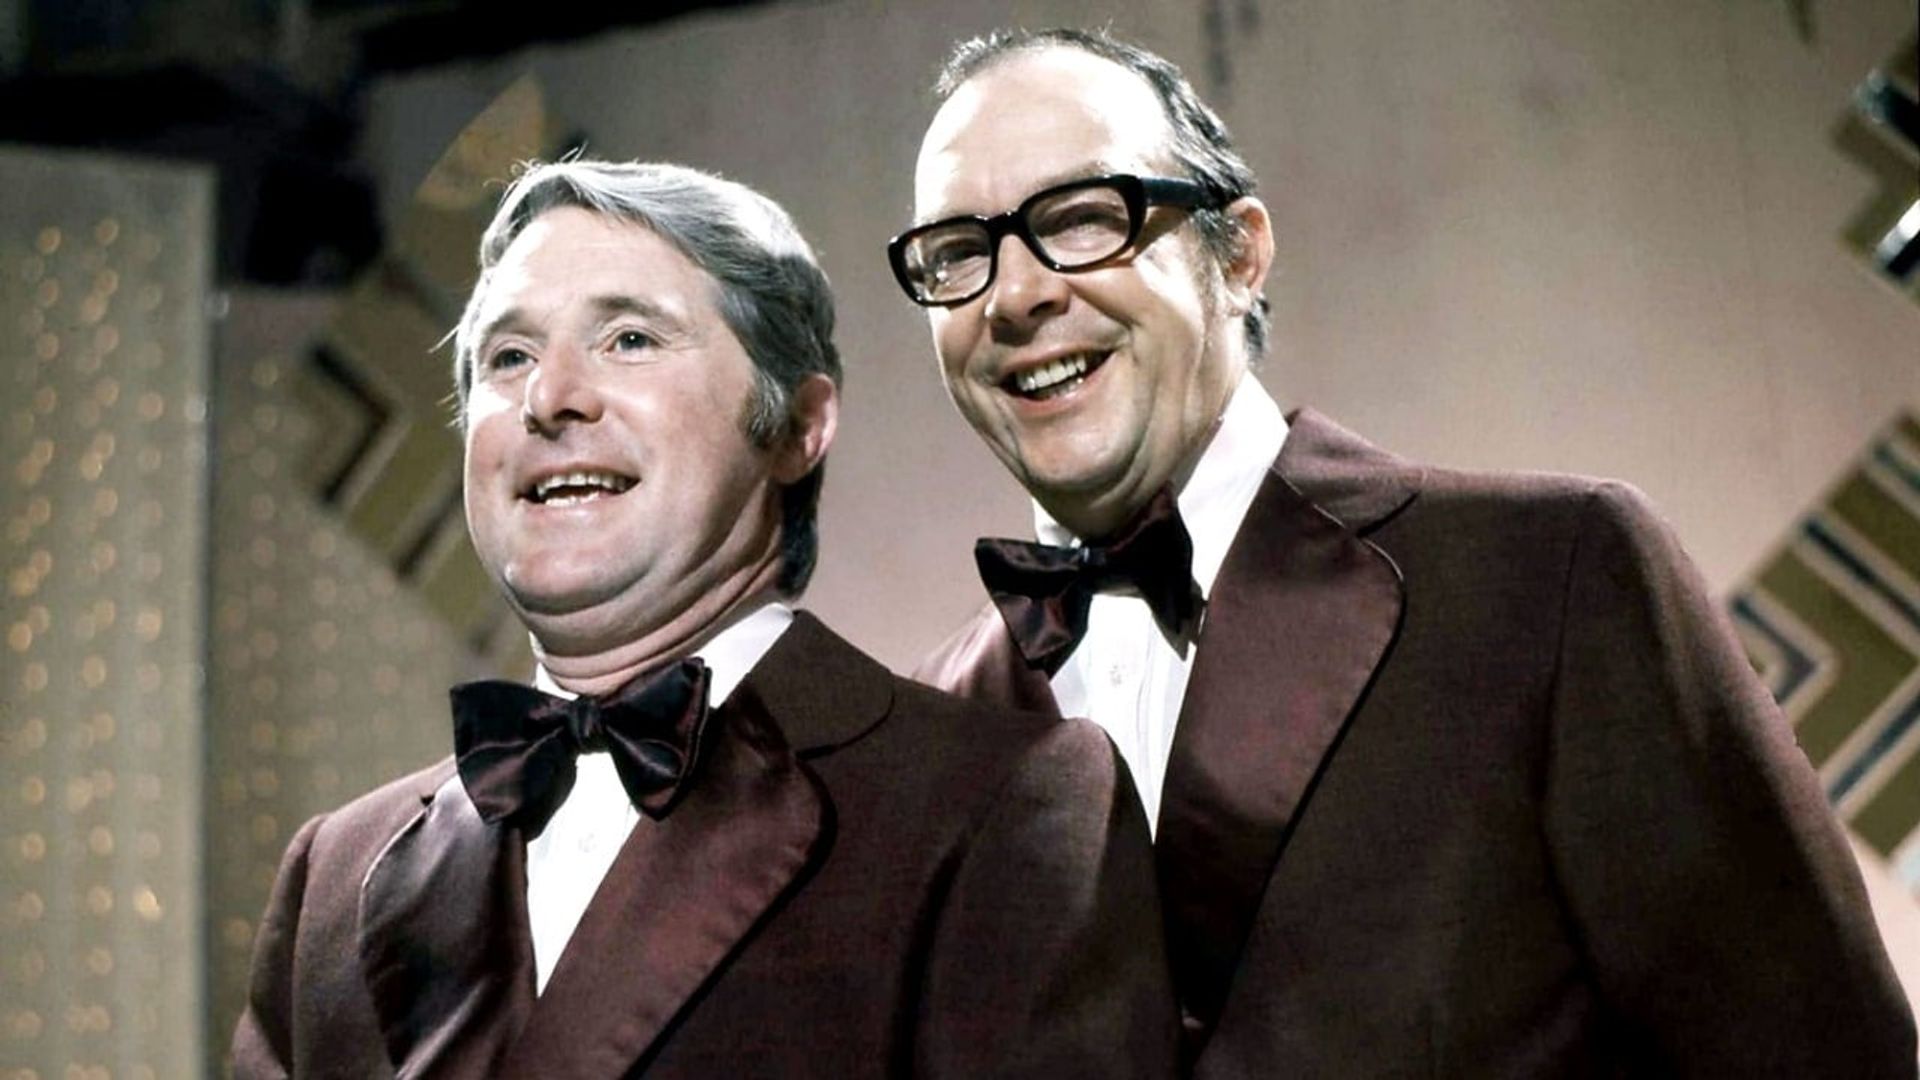 The Best of Morecambe & Wise background